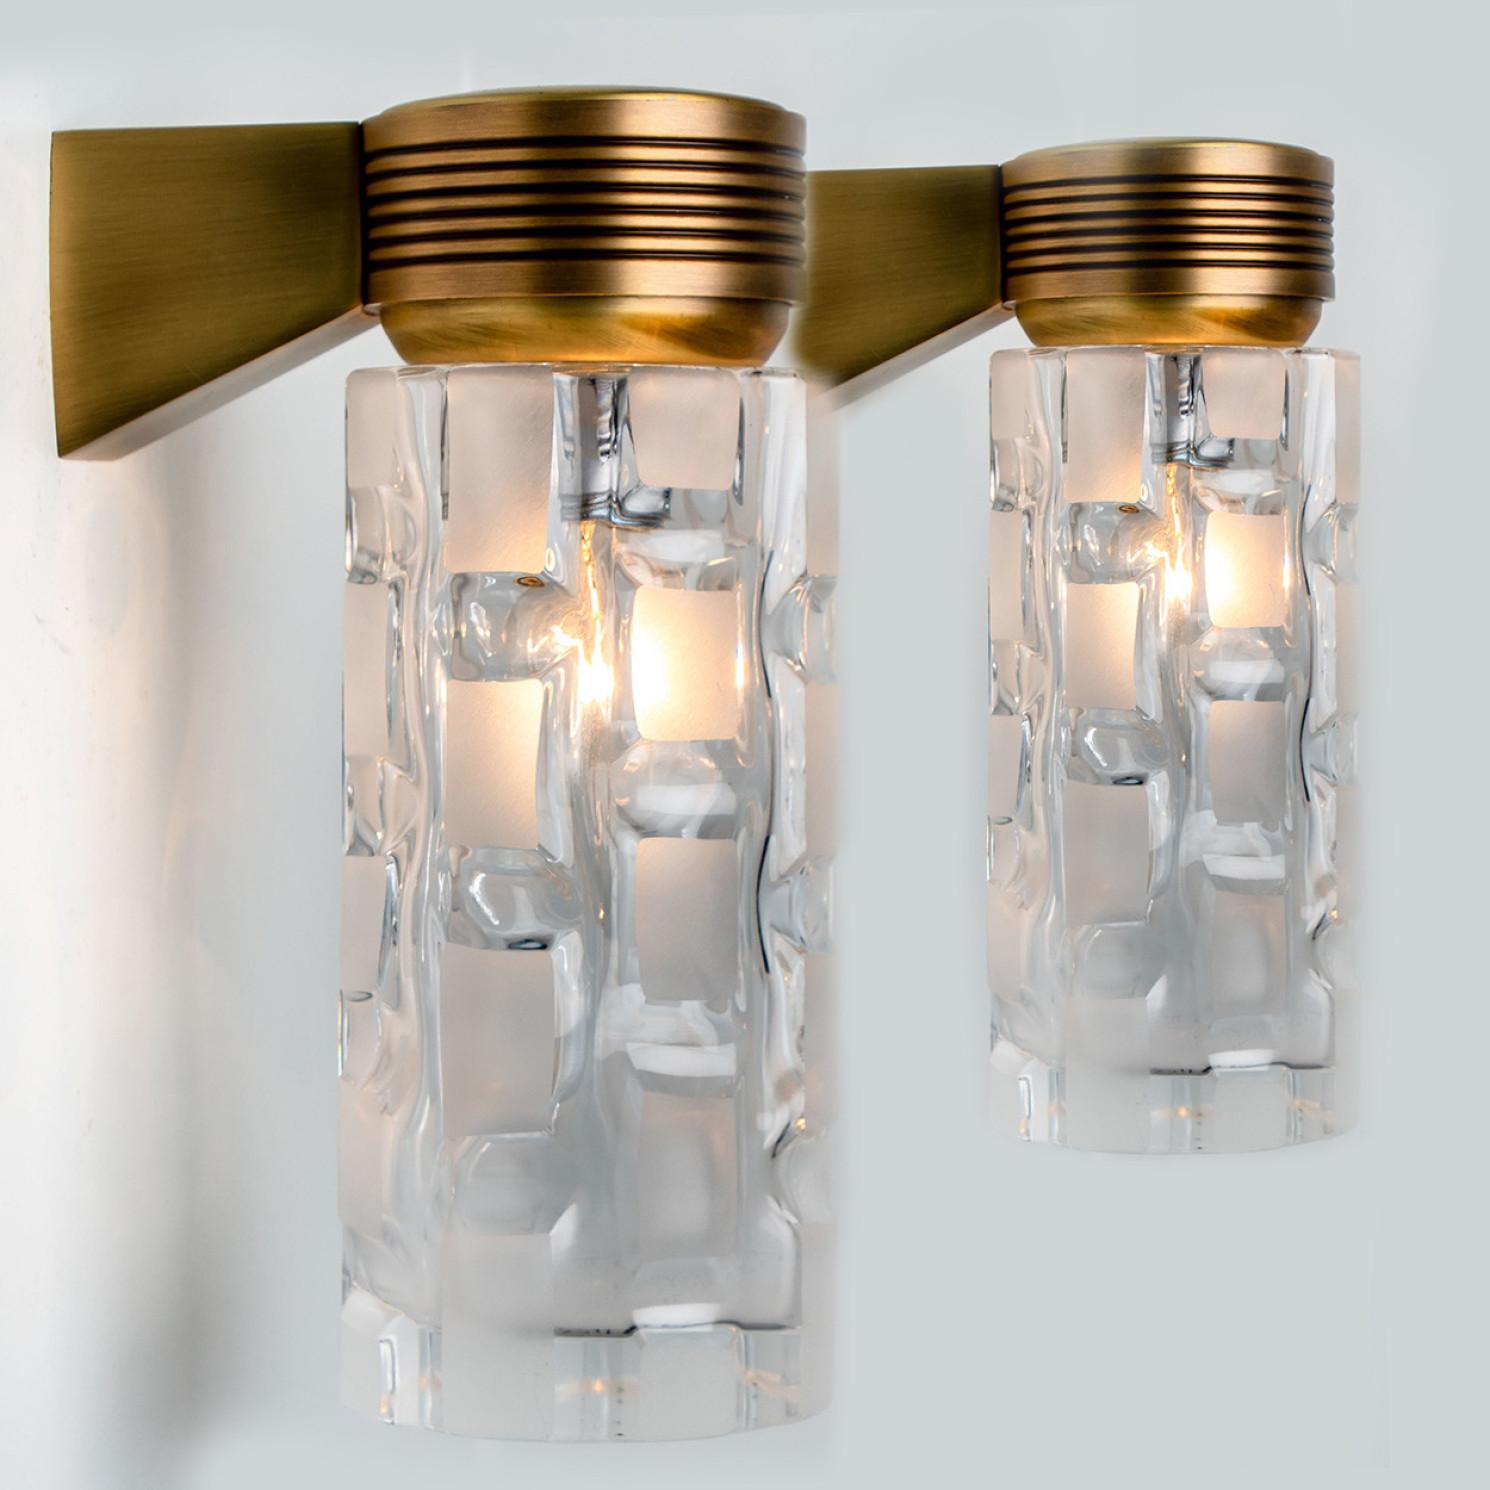 Wonderful high-end wall light fixtures manufactured by the german company Hillebrand, around 1970.
Clean lines to complement all decors. The lights have a brass base and thick clear and milk glass, filling a room with a soft, warm glow.

The wall